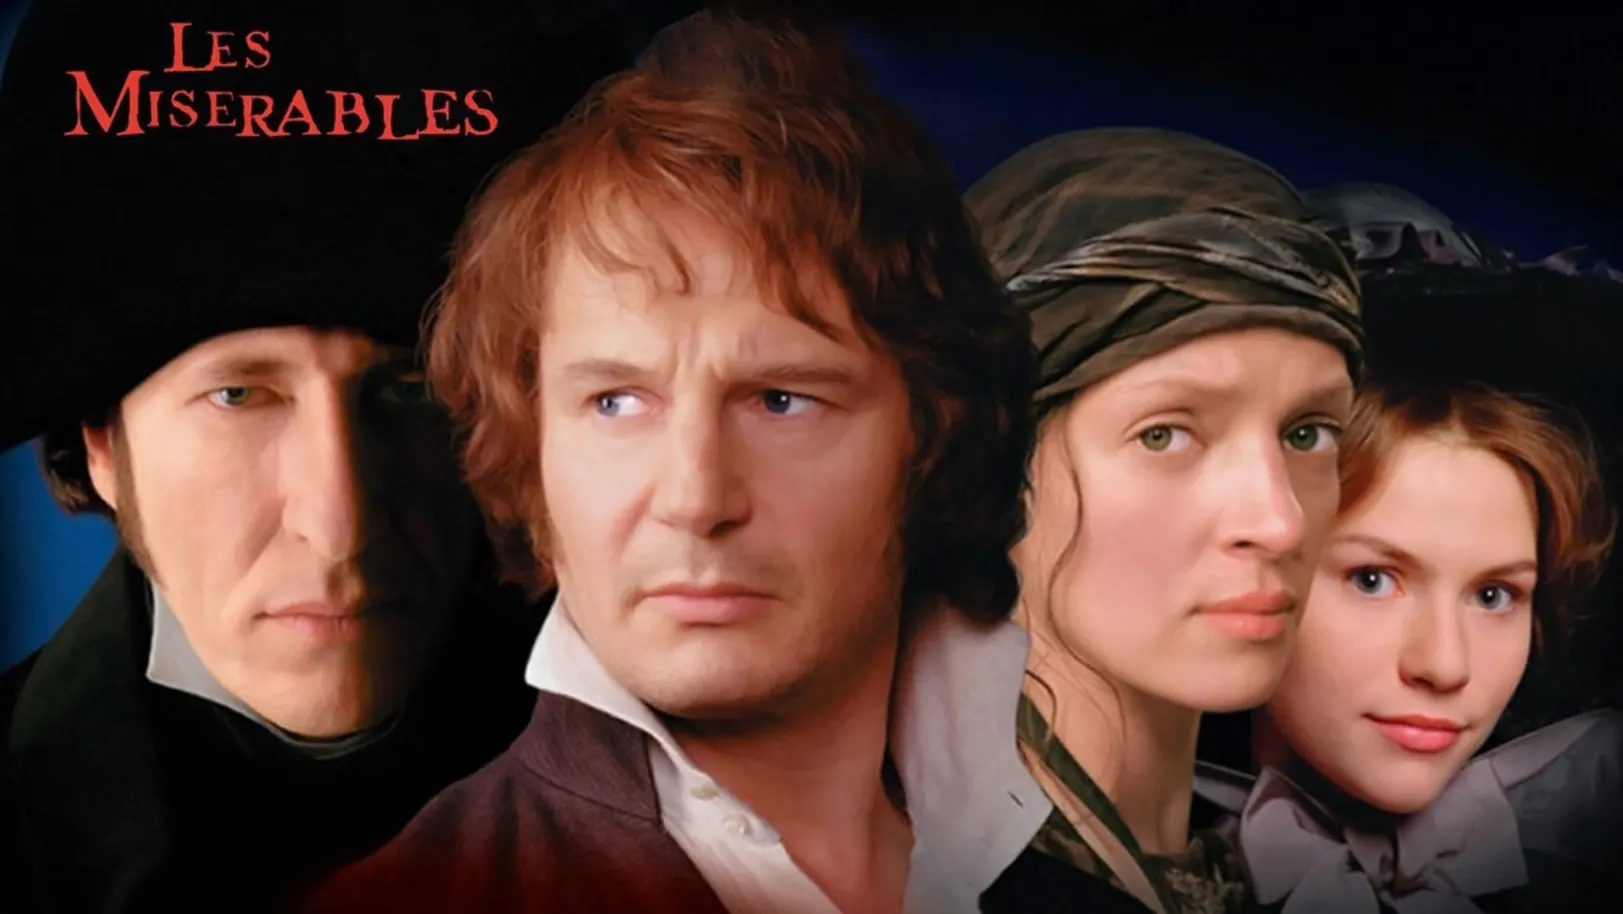 Les Miserables Streaming Now On &Prive HD